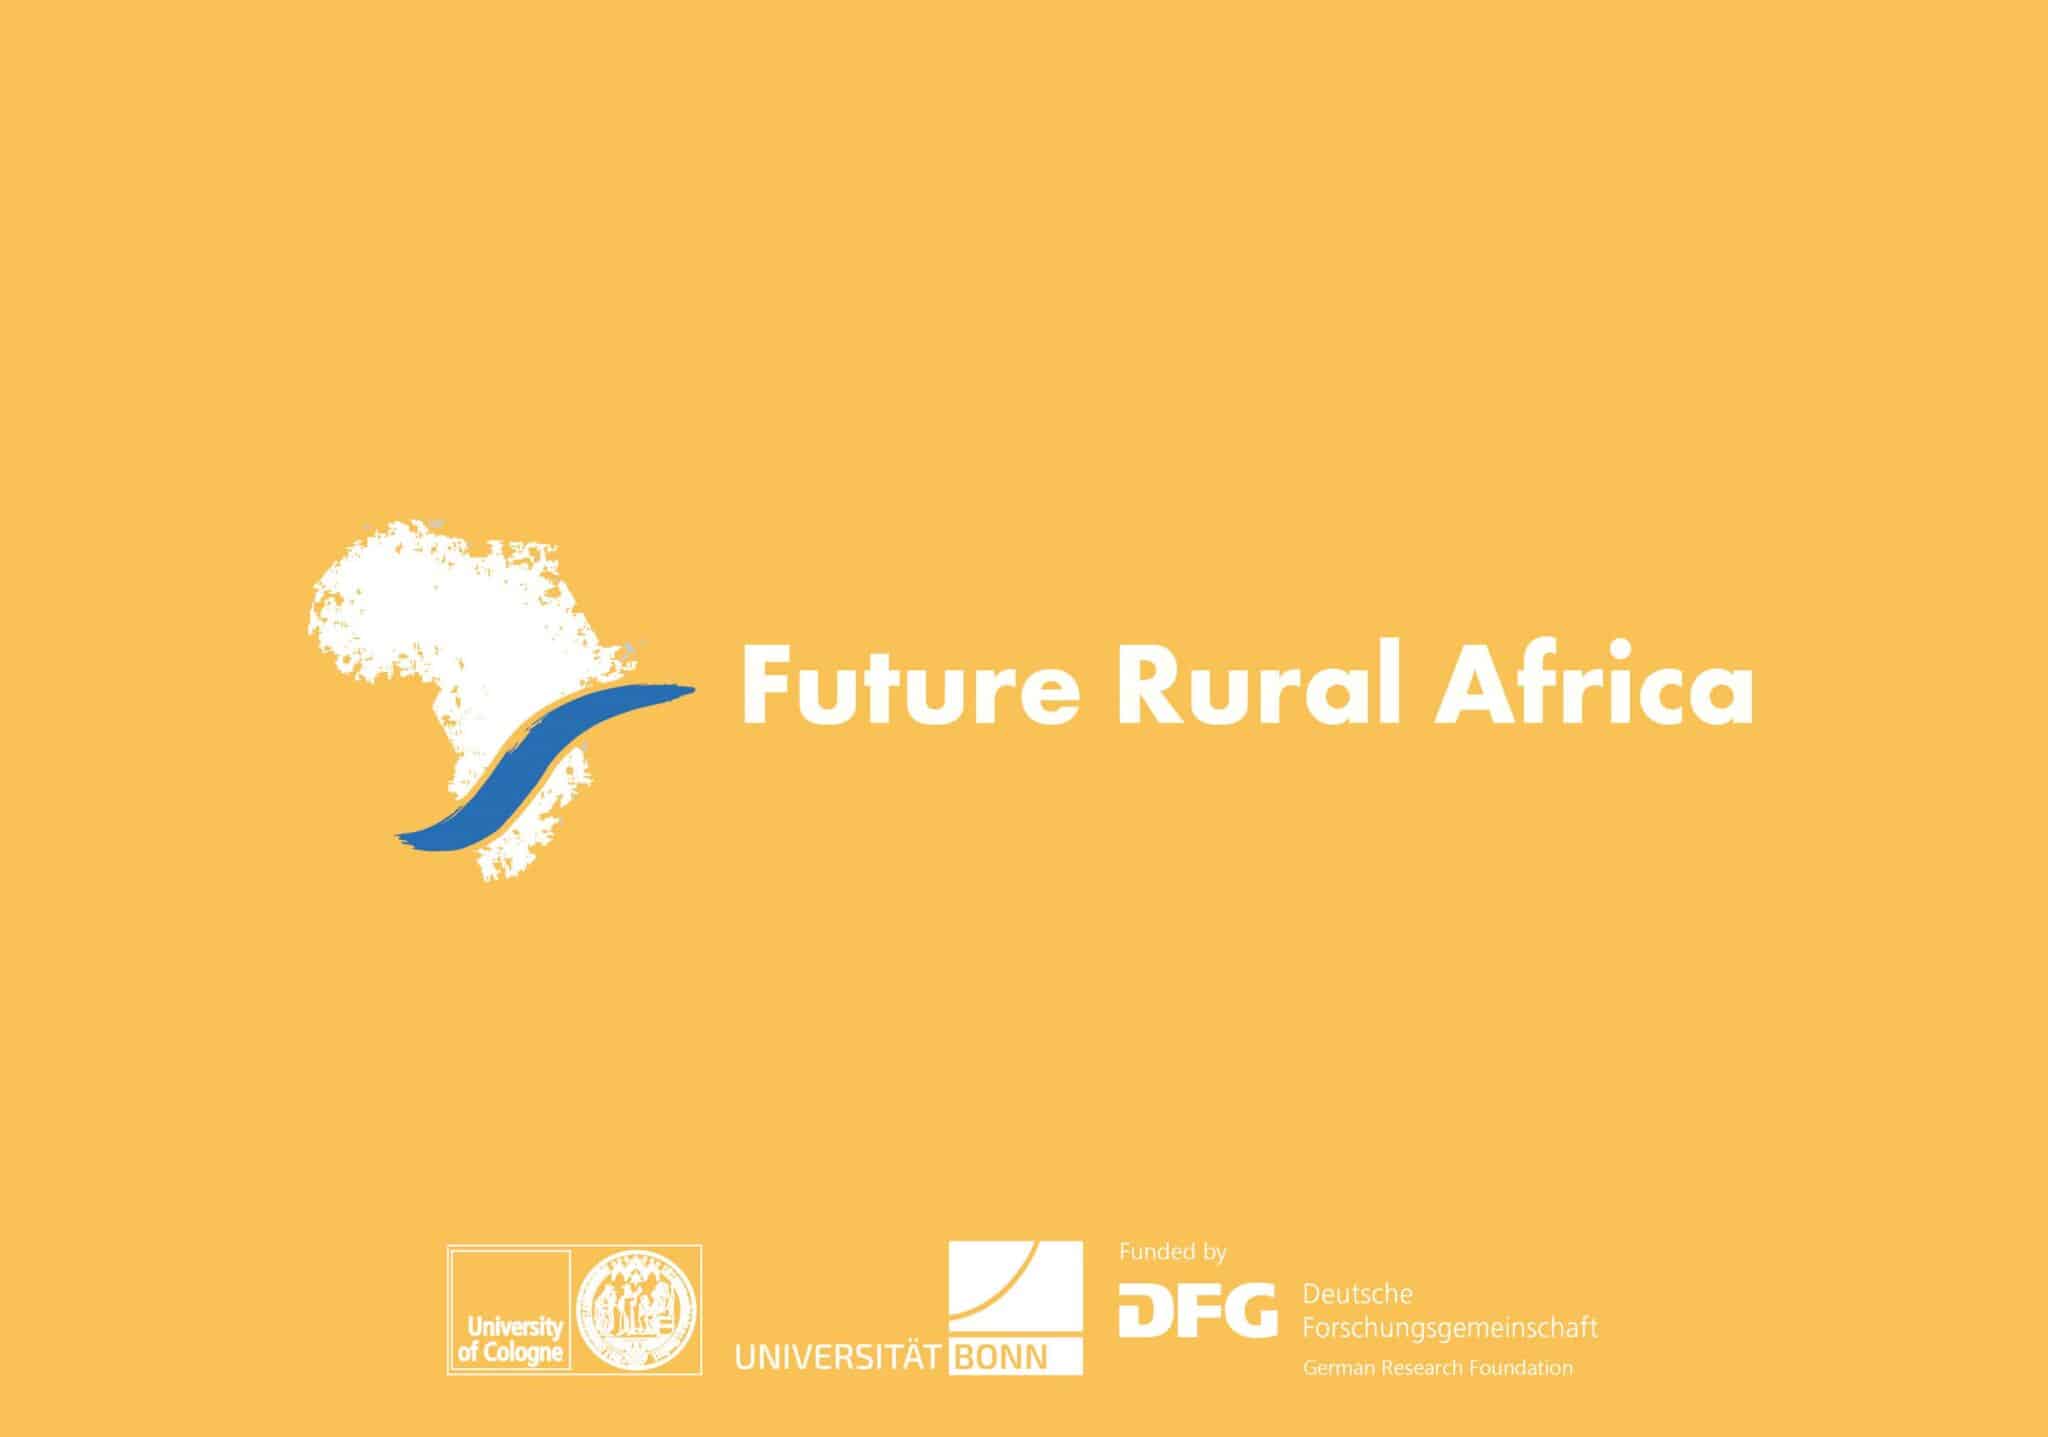 A cover image of the CRC Future Rural Africa